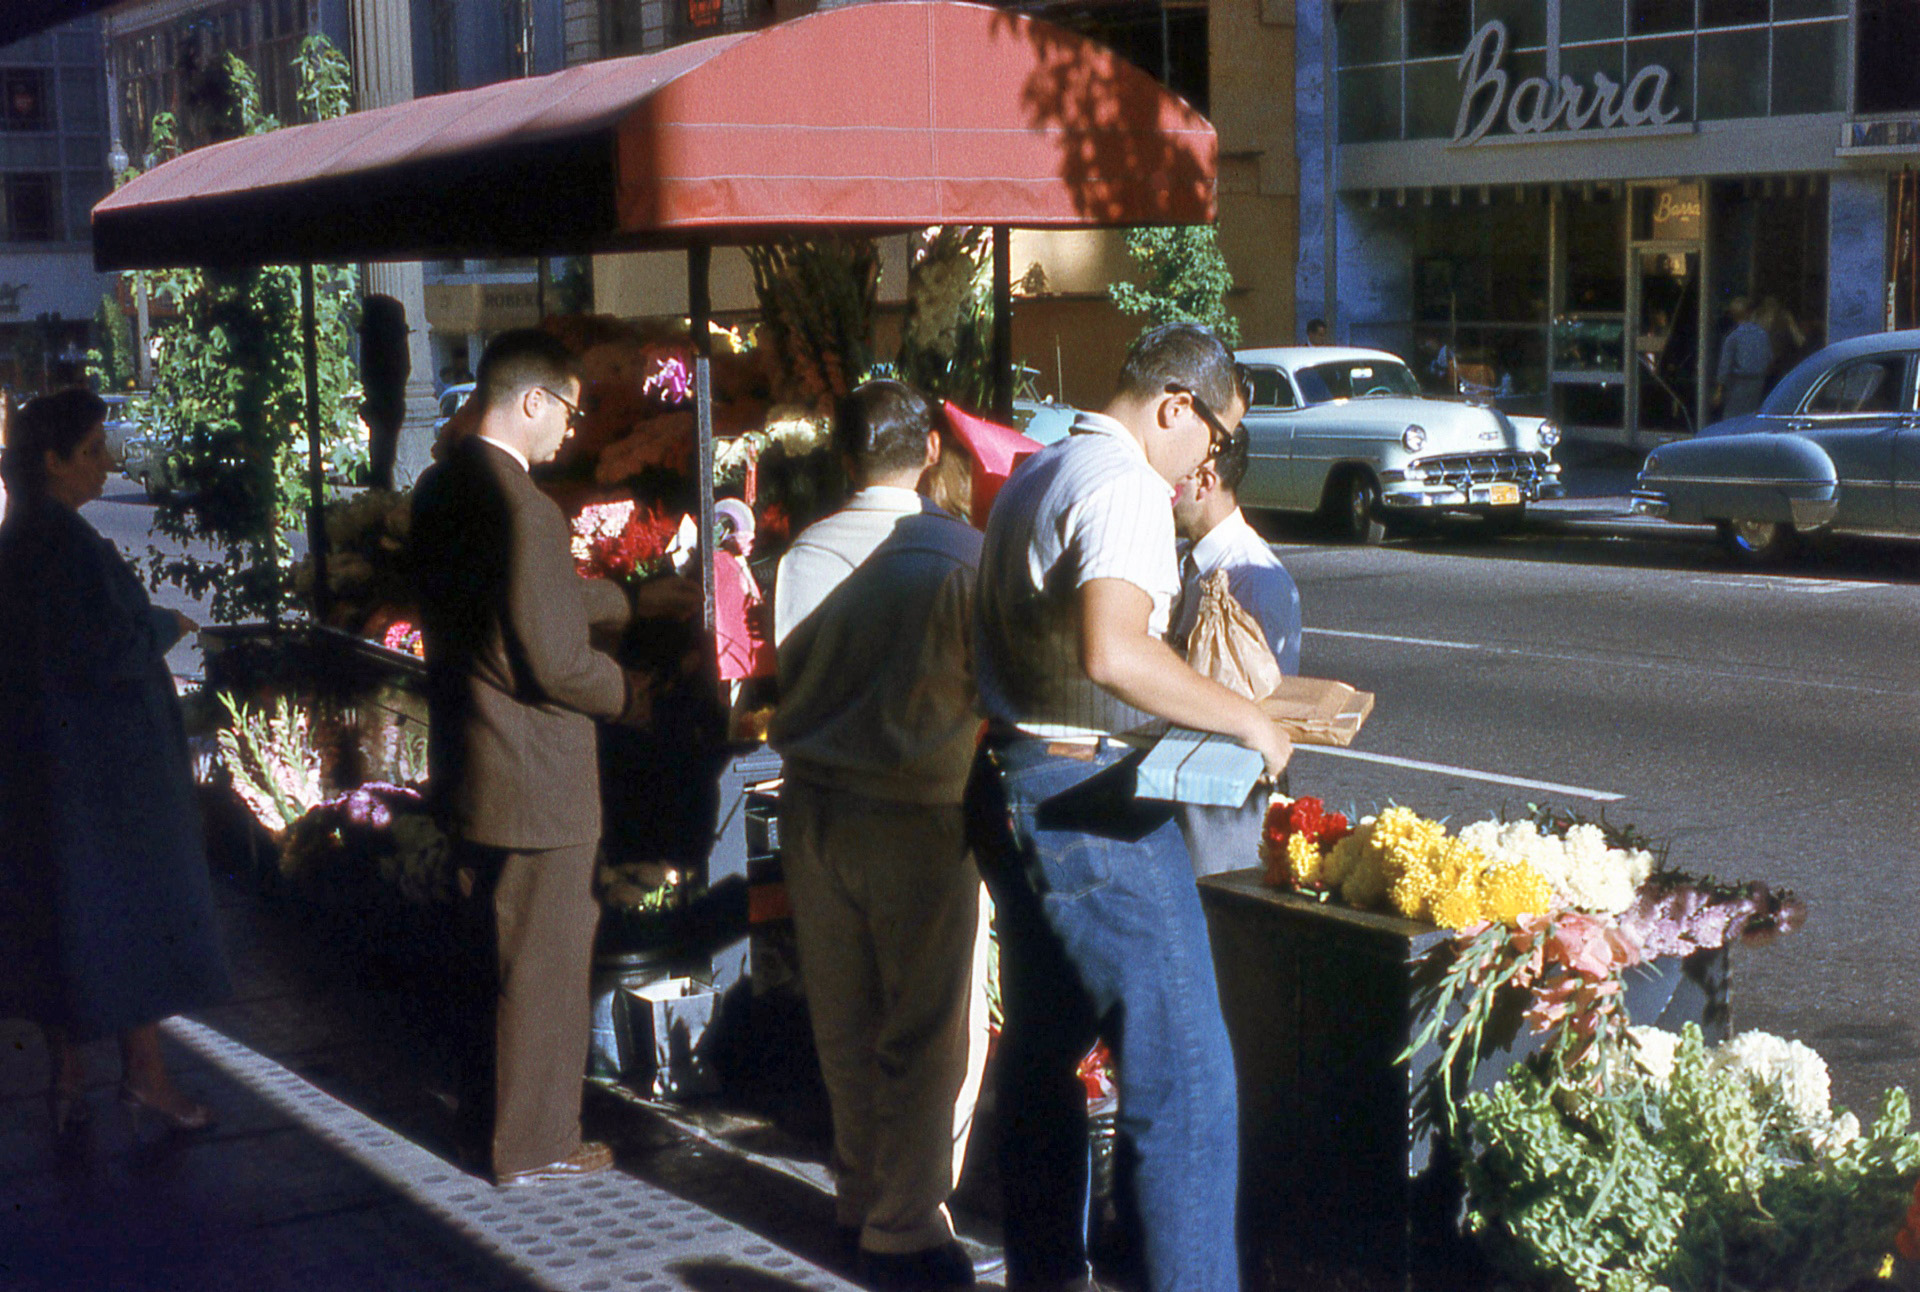 Another slide from San Francisco, where I grew up. This photo was taken on Sutter Street circa 1958. Shot on Anscochrome film, with surprisingly vivid colors!  They brought Flower Power to San Francisco well before the hippies arrived! View full size.